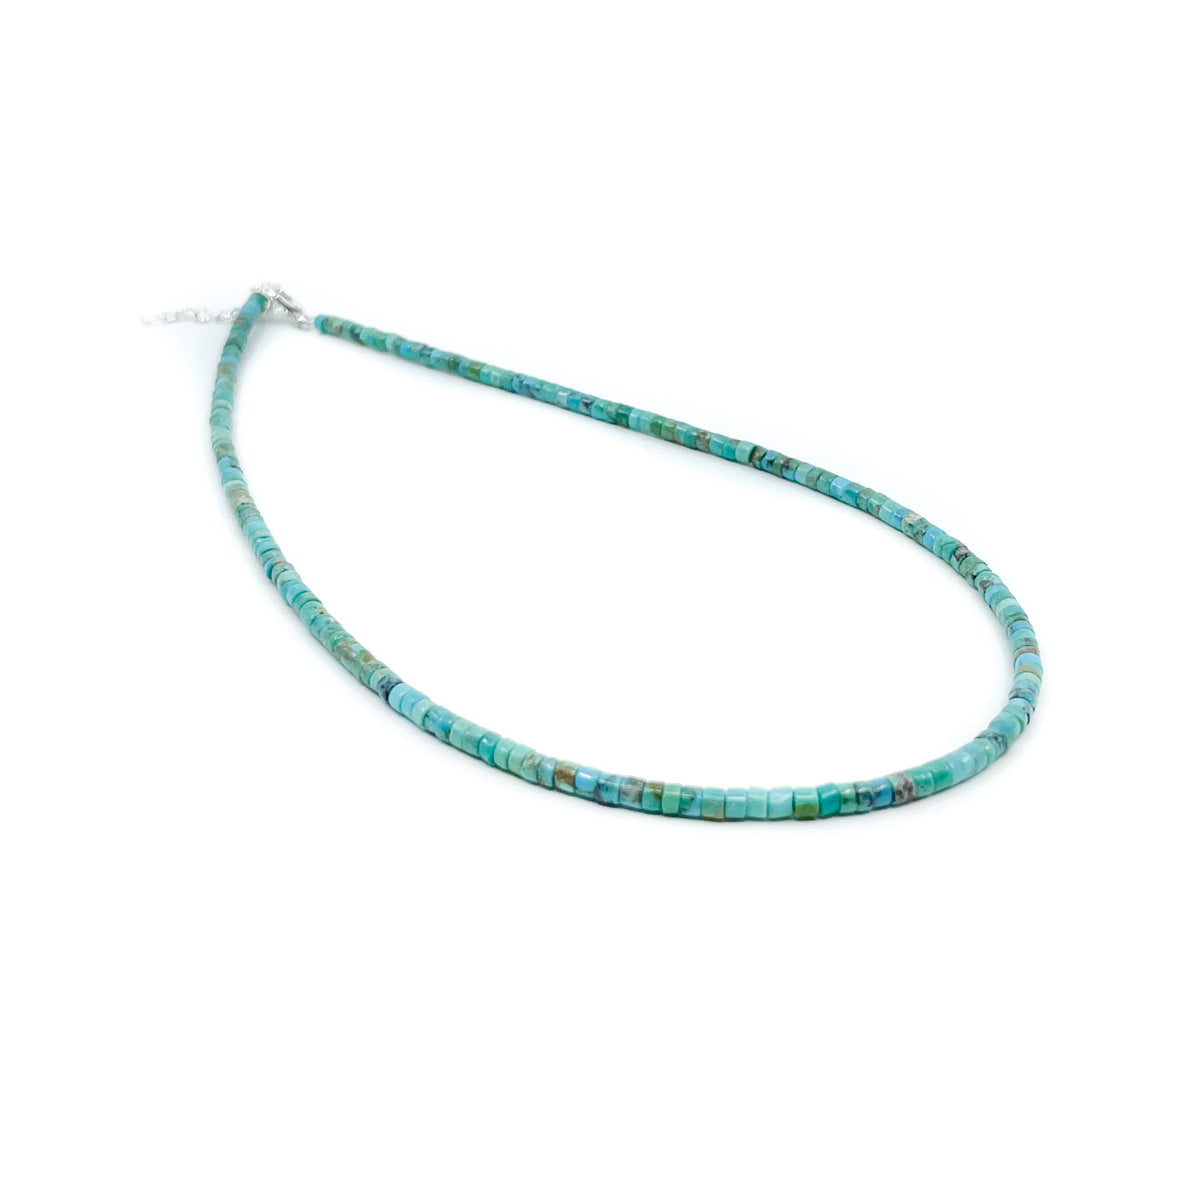 Turquoise Heishe Choker Necklace